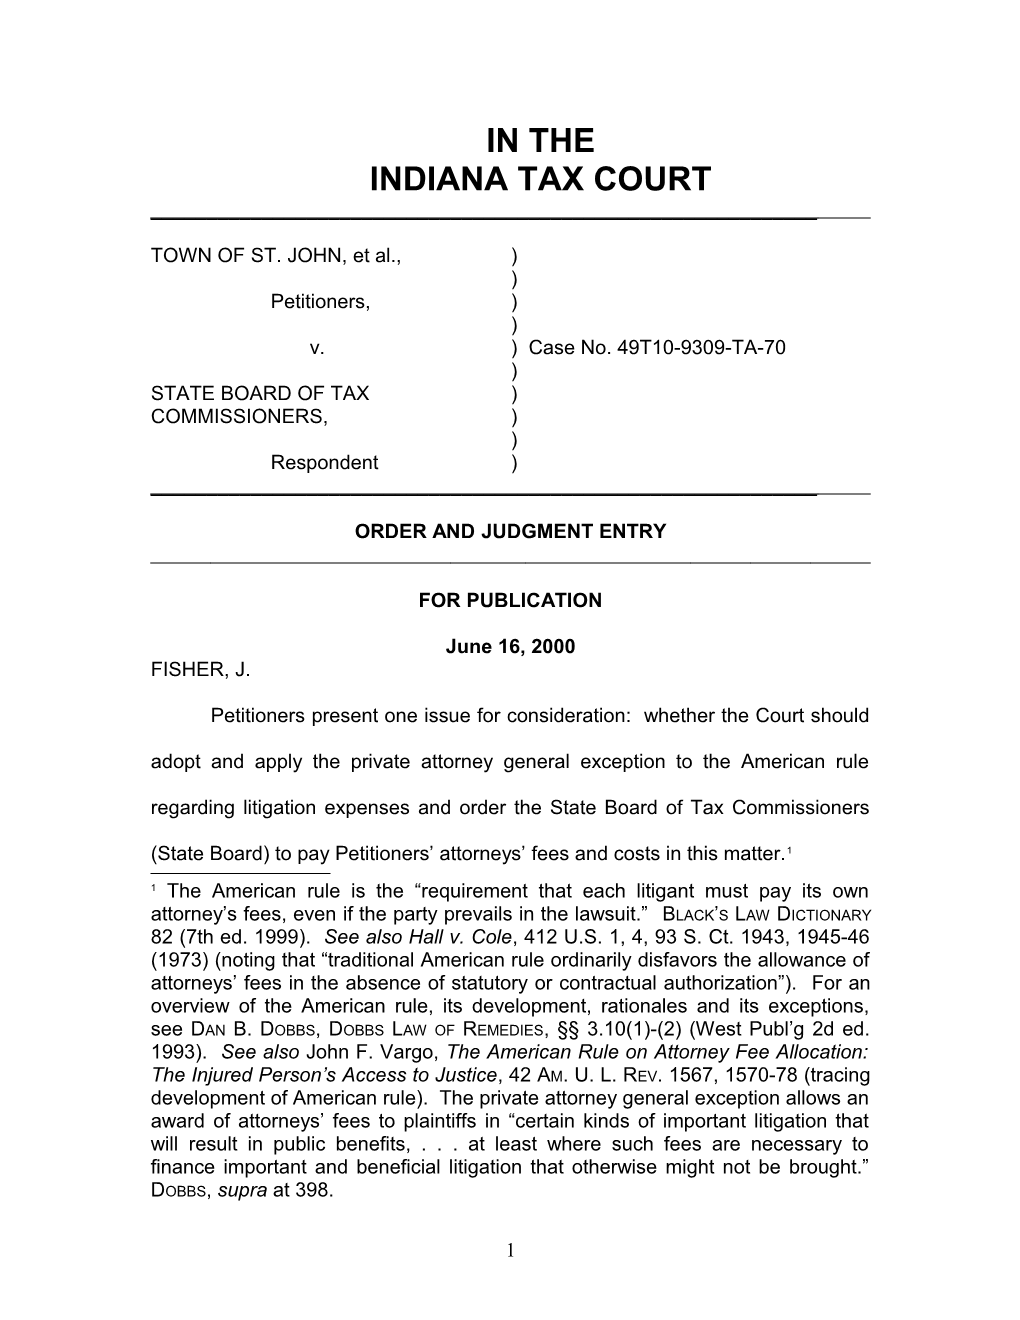 Indiana Tax Court